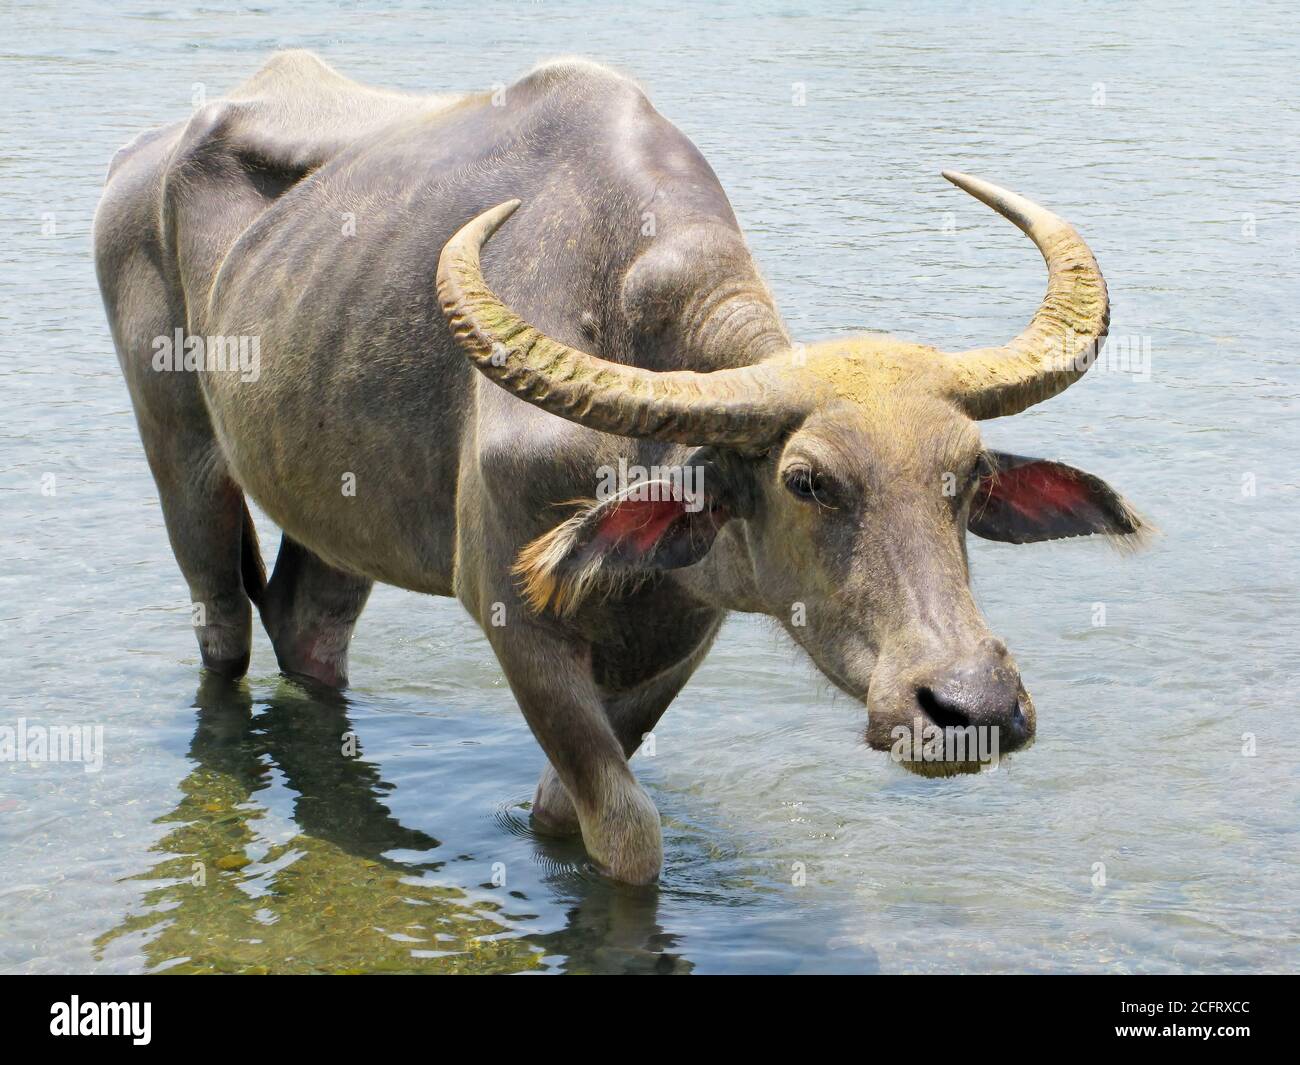 Close-up portrait of a massive water buffalo with big horns. This carabao leaving a pool of water, Luzon, Philippines Stock Photo